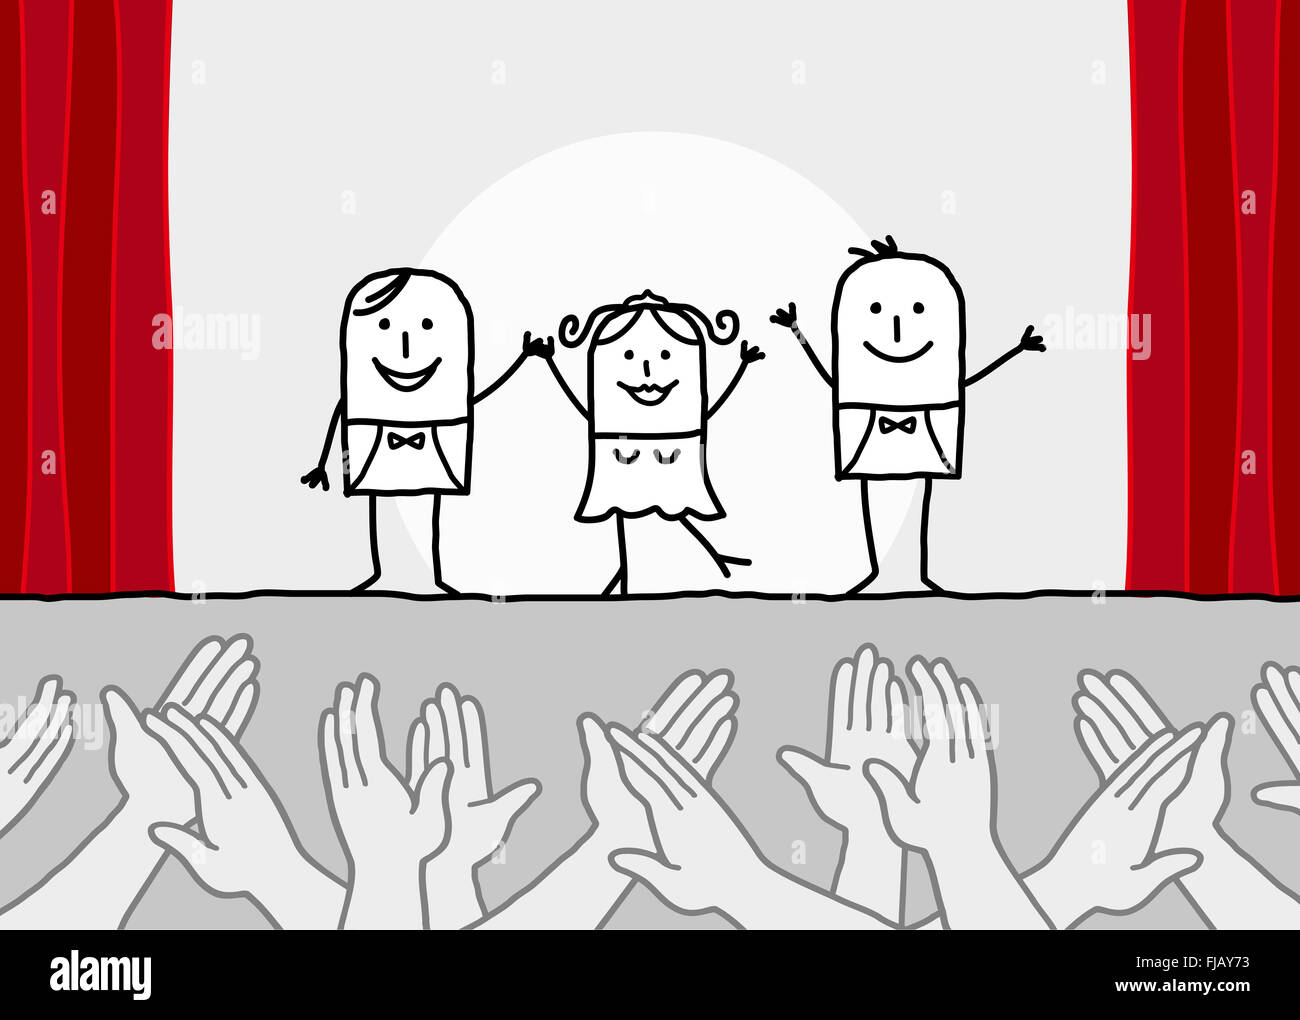 hand drawn cartoon characters - theater show & clapping hands Stock Photo